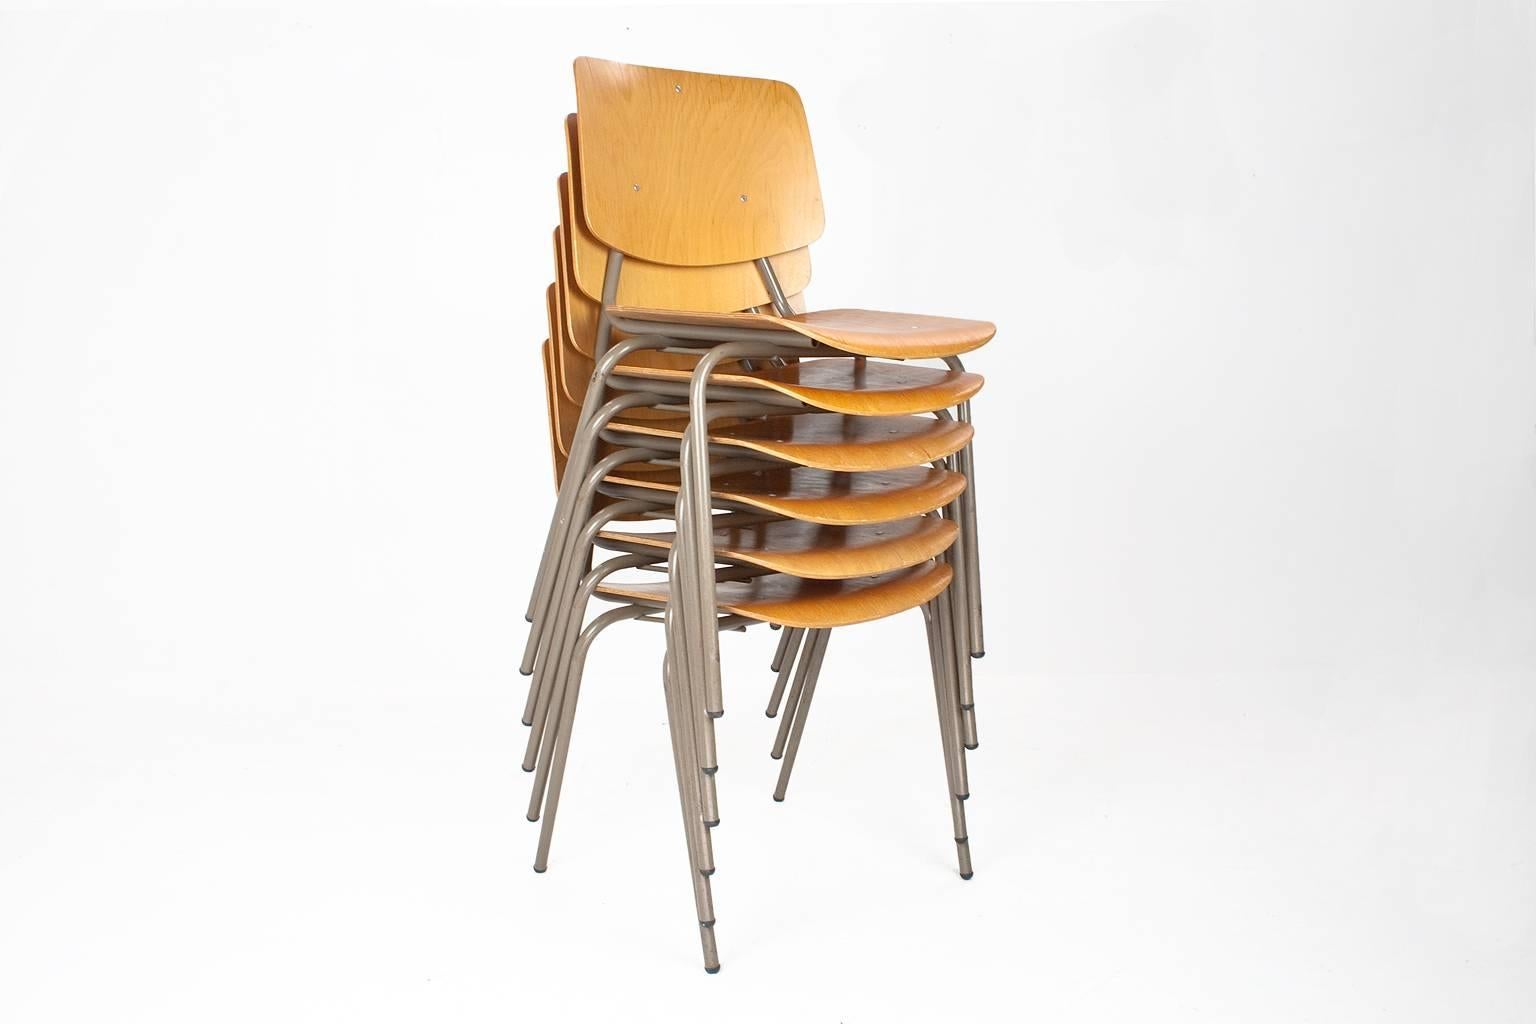 Dutch Industrial stock of school chairs (or dining room chairs) by Kho Liang Ie. Kho Liang Ie designed these chairs for CAR Katwijk (NL), model 305 design. 

Grey metal frame with mid brown moulded seating and back. The items are in good condition